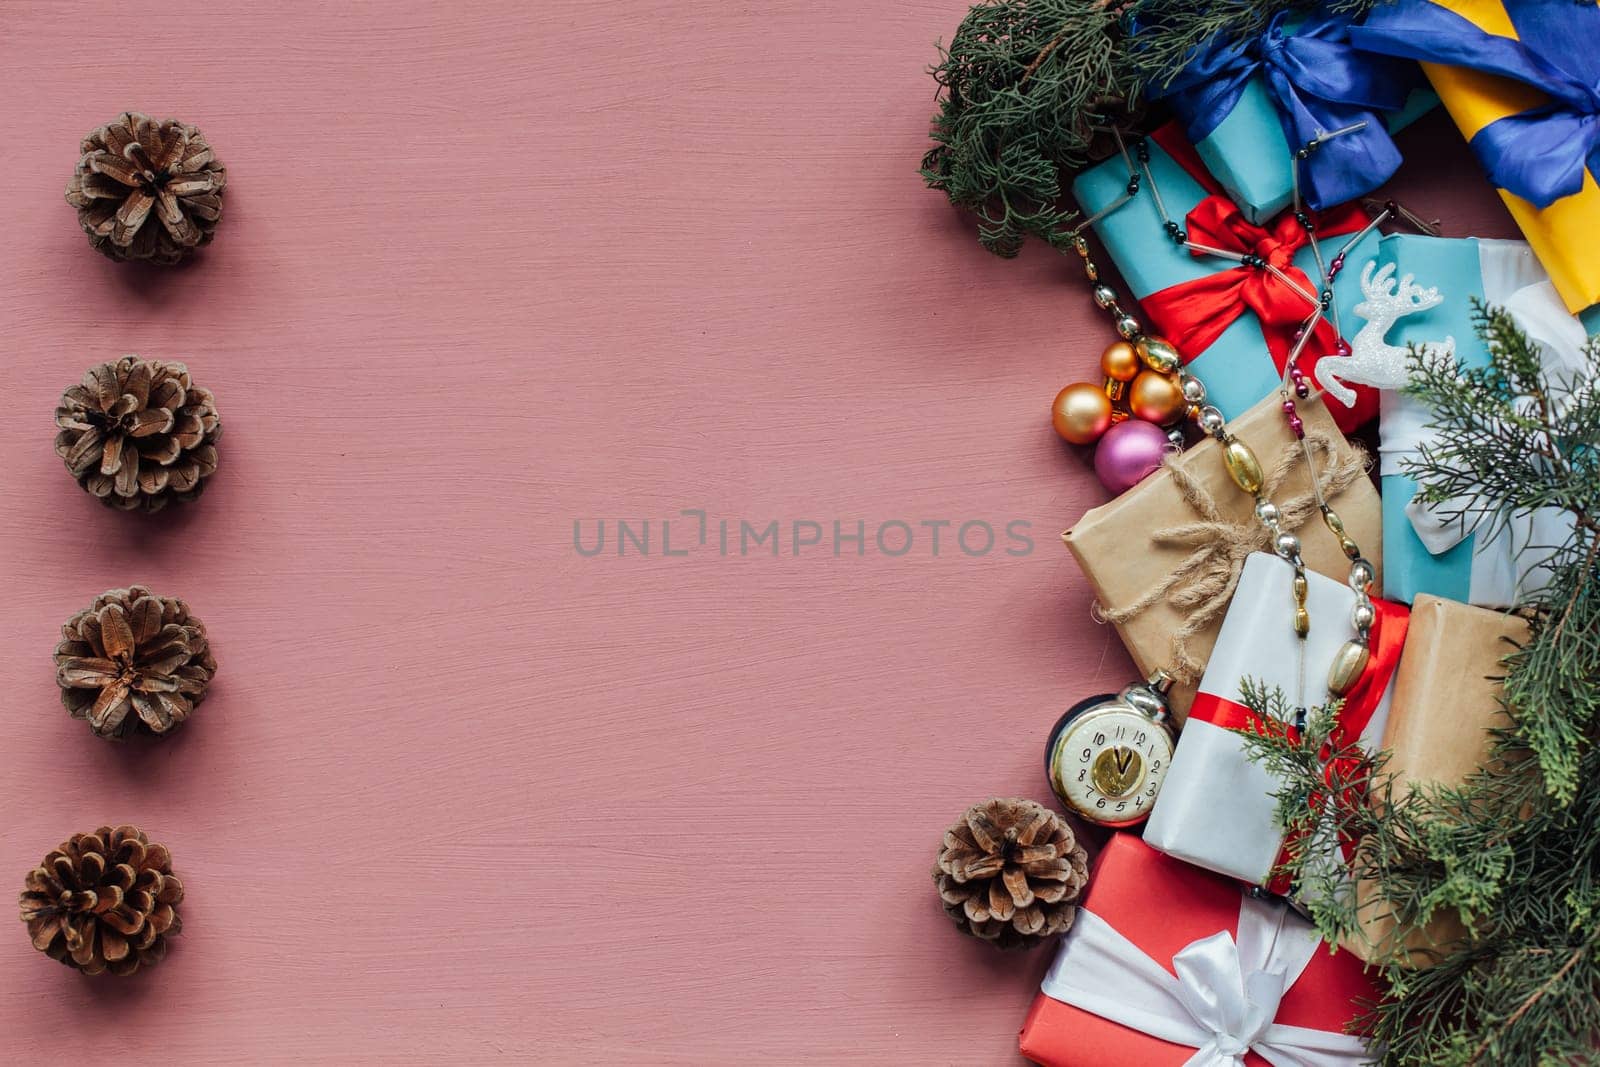 Christmas Toys Festive Gifts Dekor New Year on a pink background by Simakov